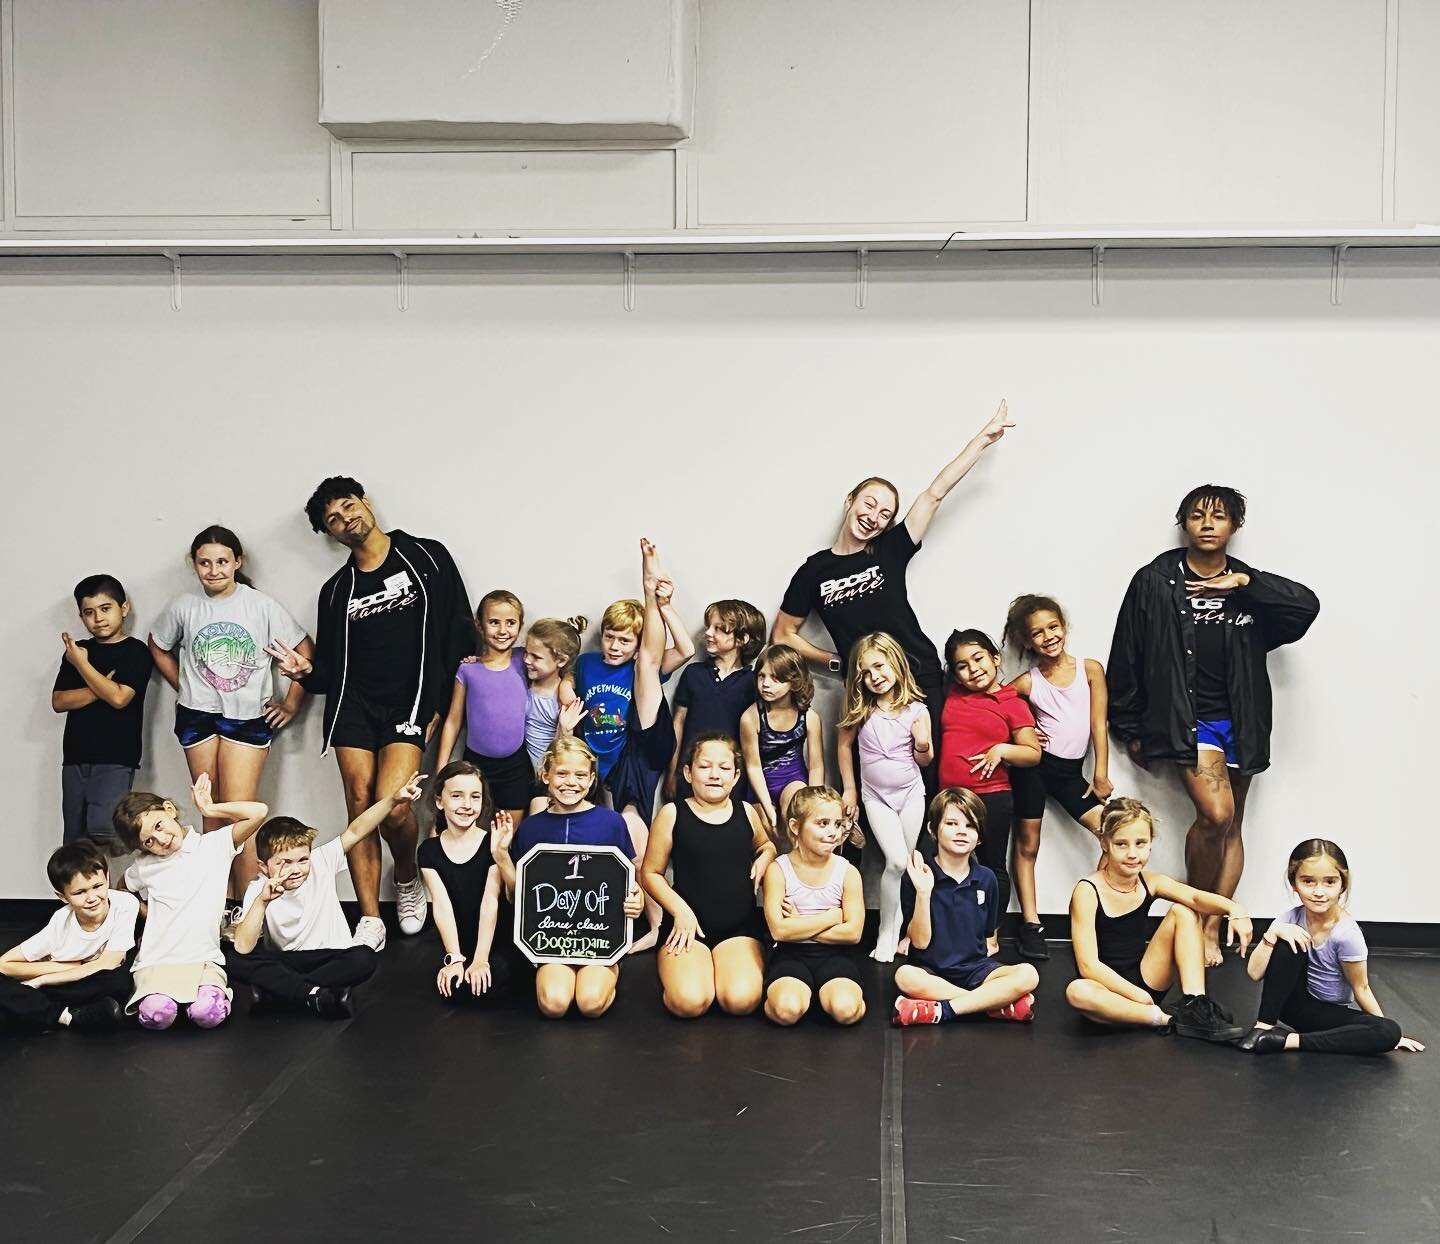 Fridays and Saturdays couldn&rsquo;t be more fun at BOOST Dance Academy! Check out our last set of 1st day photos from this past week!  #nashvilledance #dancersintn #bellevuetn #nashvilleparent #nashvillwfamilies